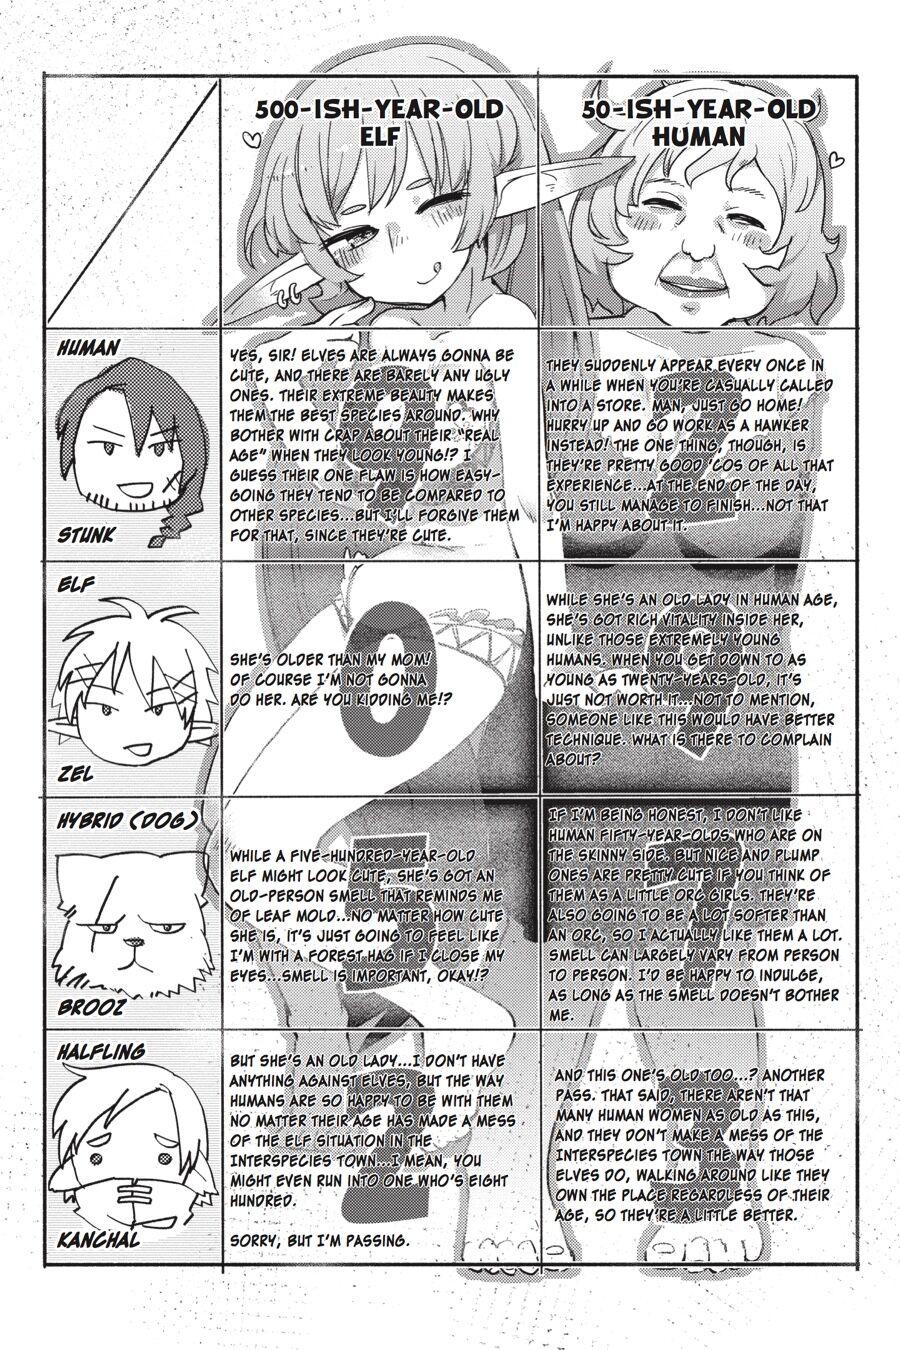 Amateurs Gone Interspecies Reviewers - Volume 1 - Ishuzoku reviewers Creamy - Page 11